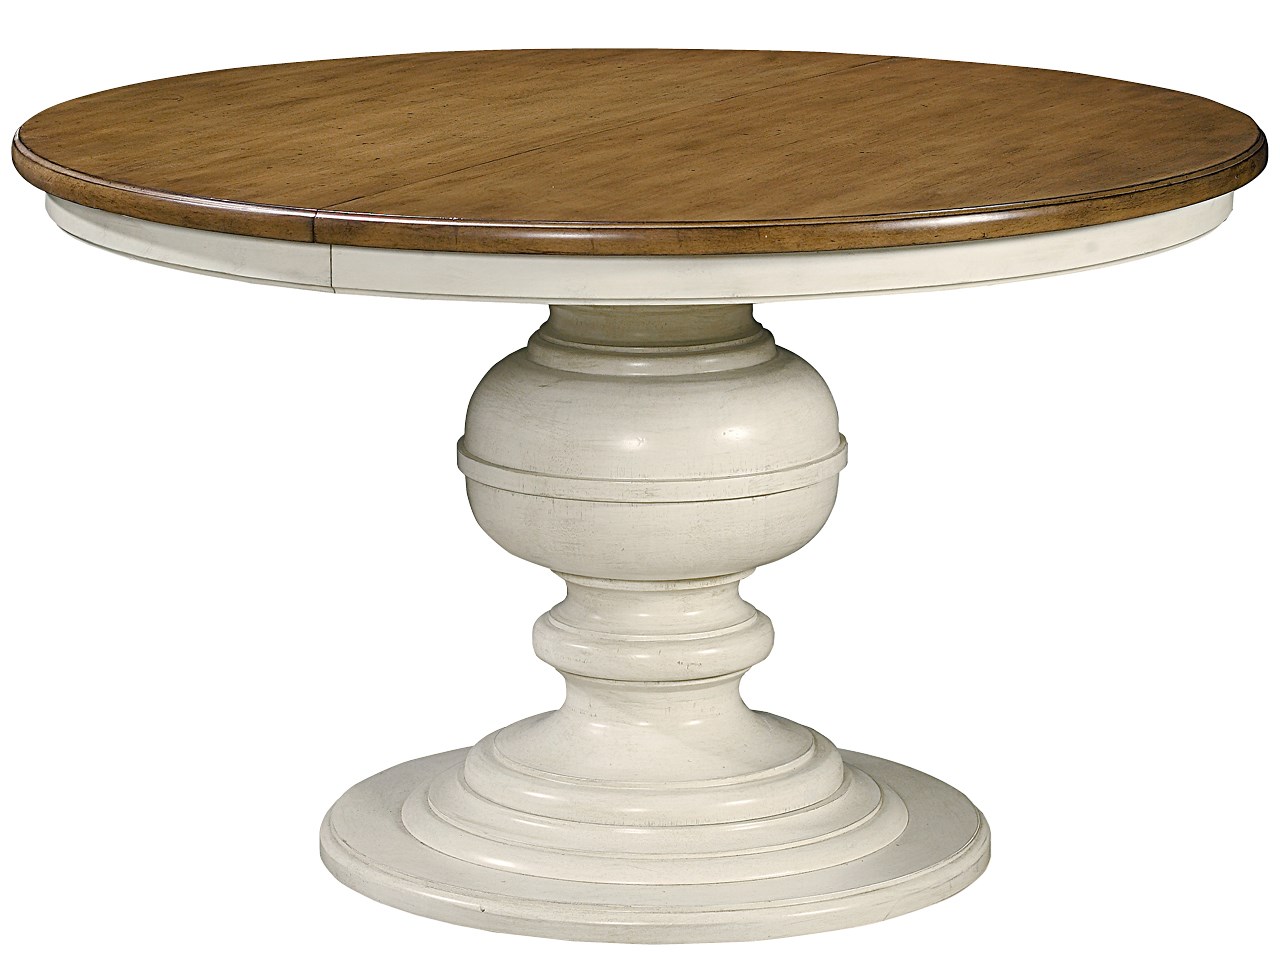 Summer Hill Round Dining Table, Dining Table Round With Leaf